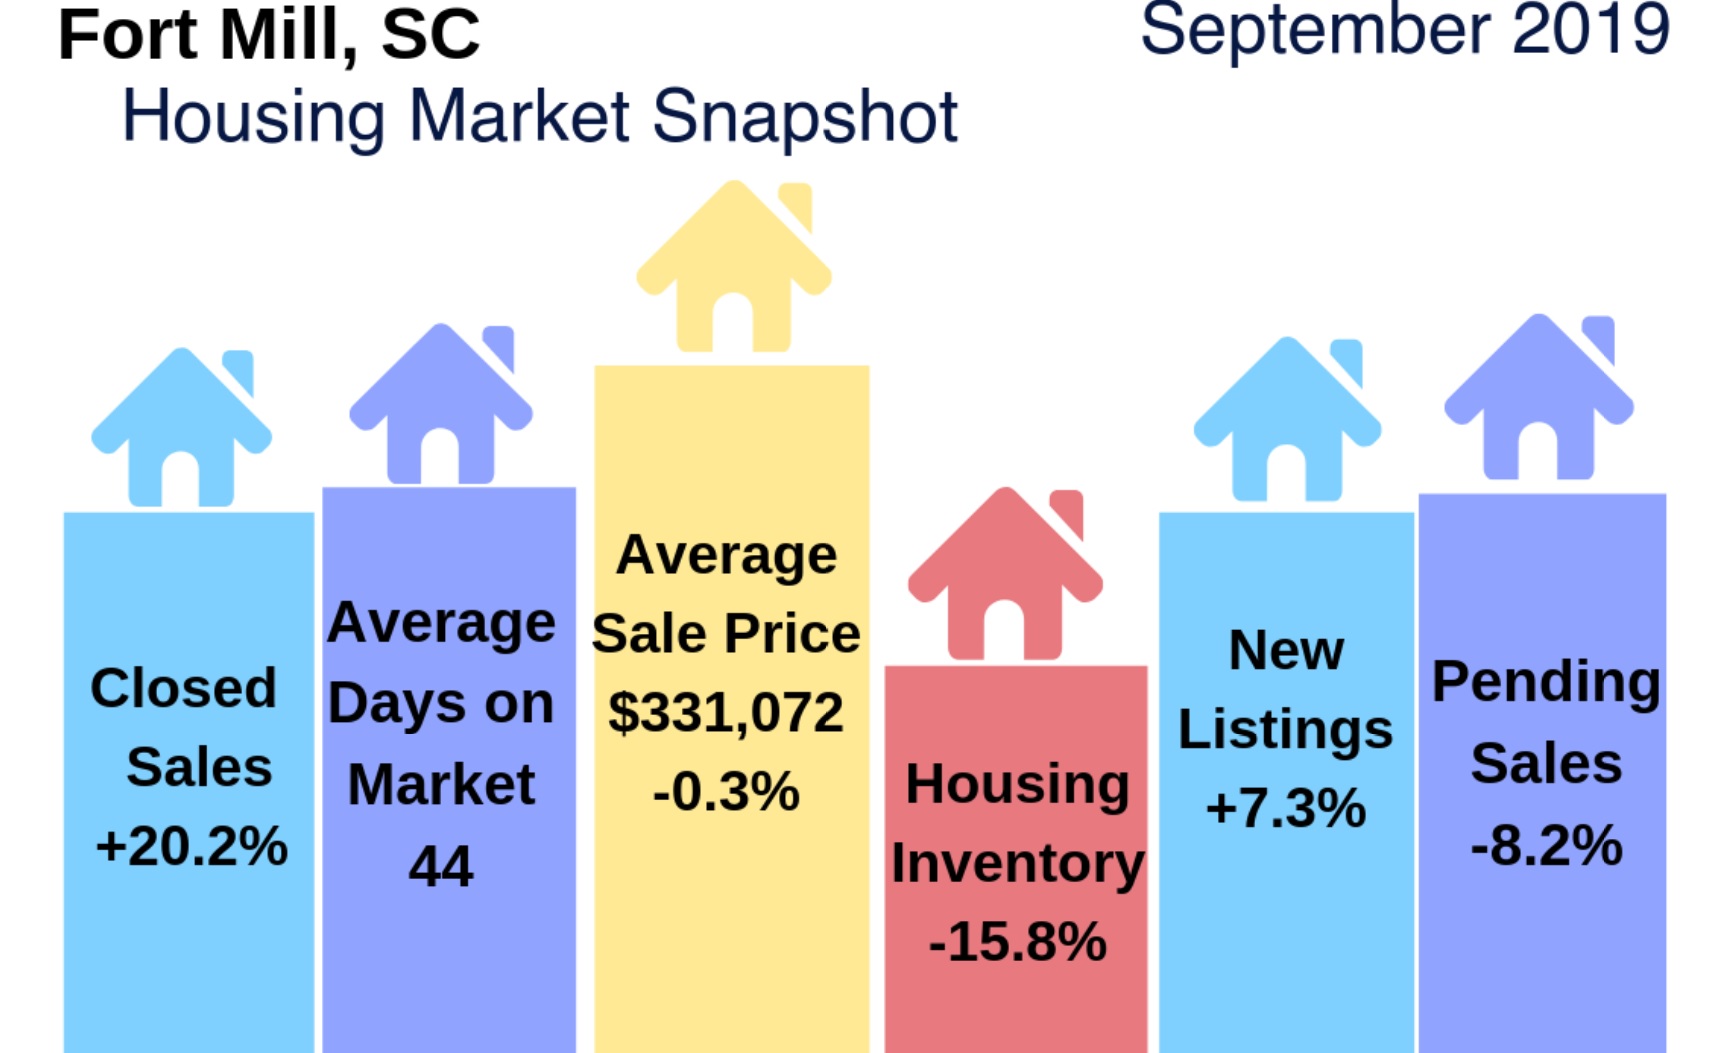 Fort Mill/Tega Cay Housing Markets: September 2019. How Did They Do?